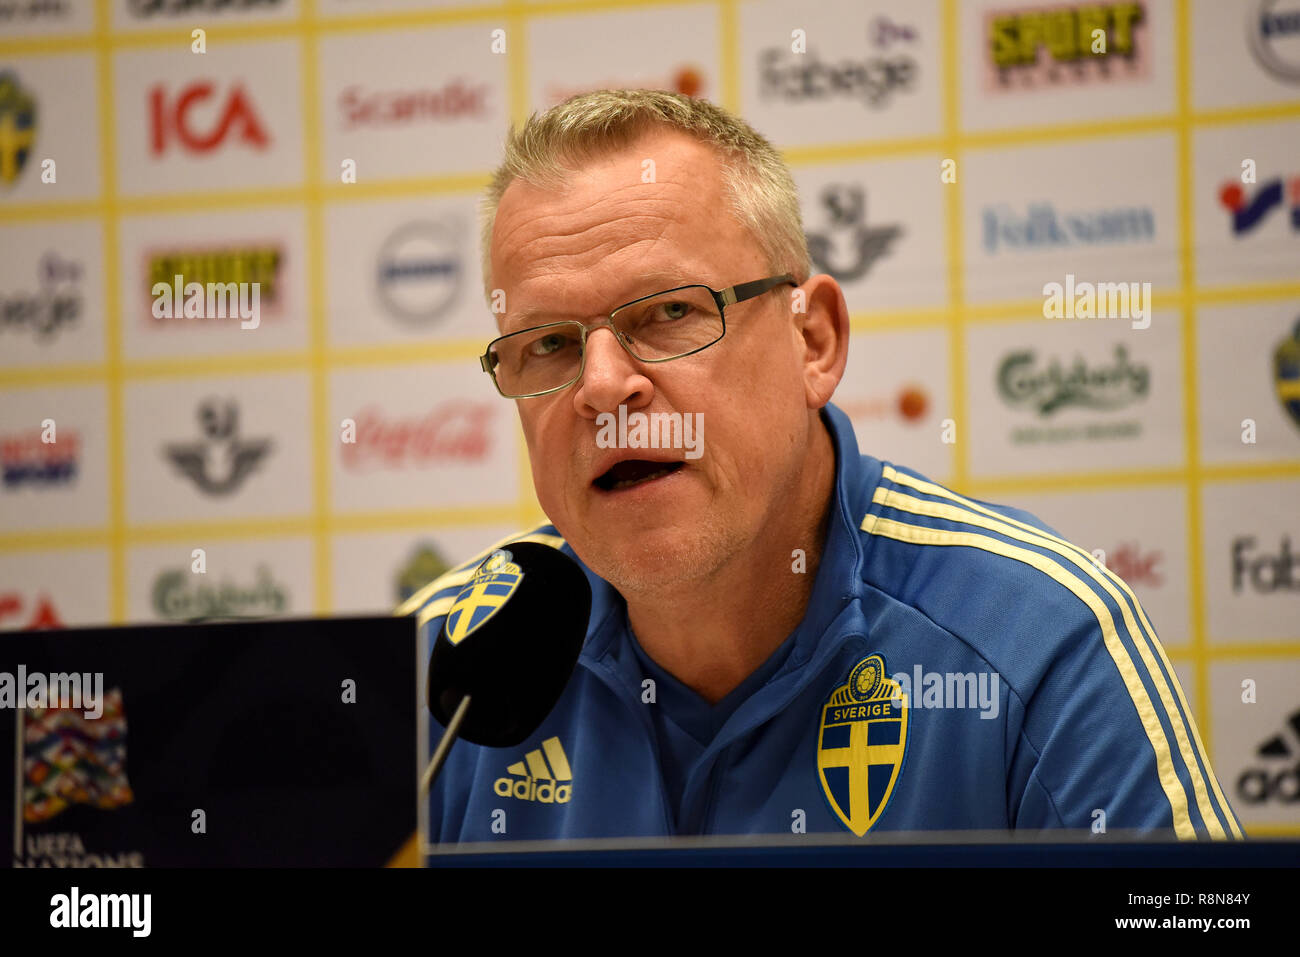 Solna, Sweden - November 20, 2018. Sweden national team coach Jan Andersson after UEFA Nations League match Sweden vs Russia in Solna. Stock Photo